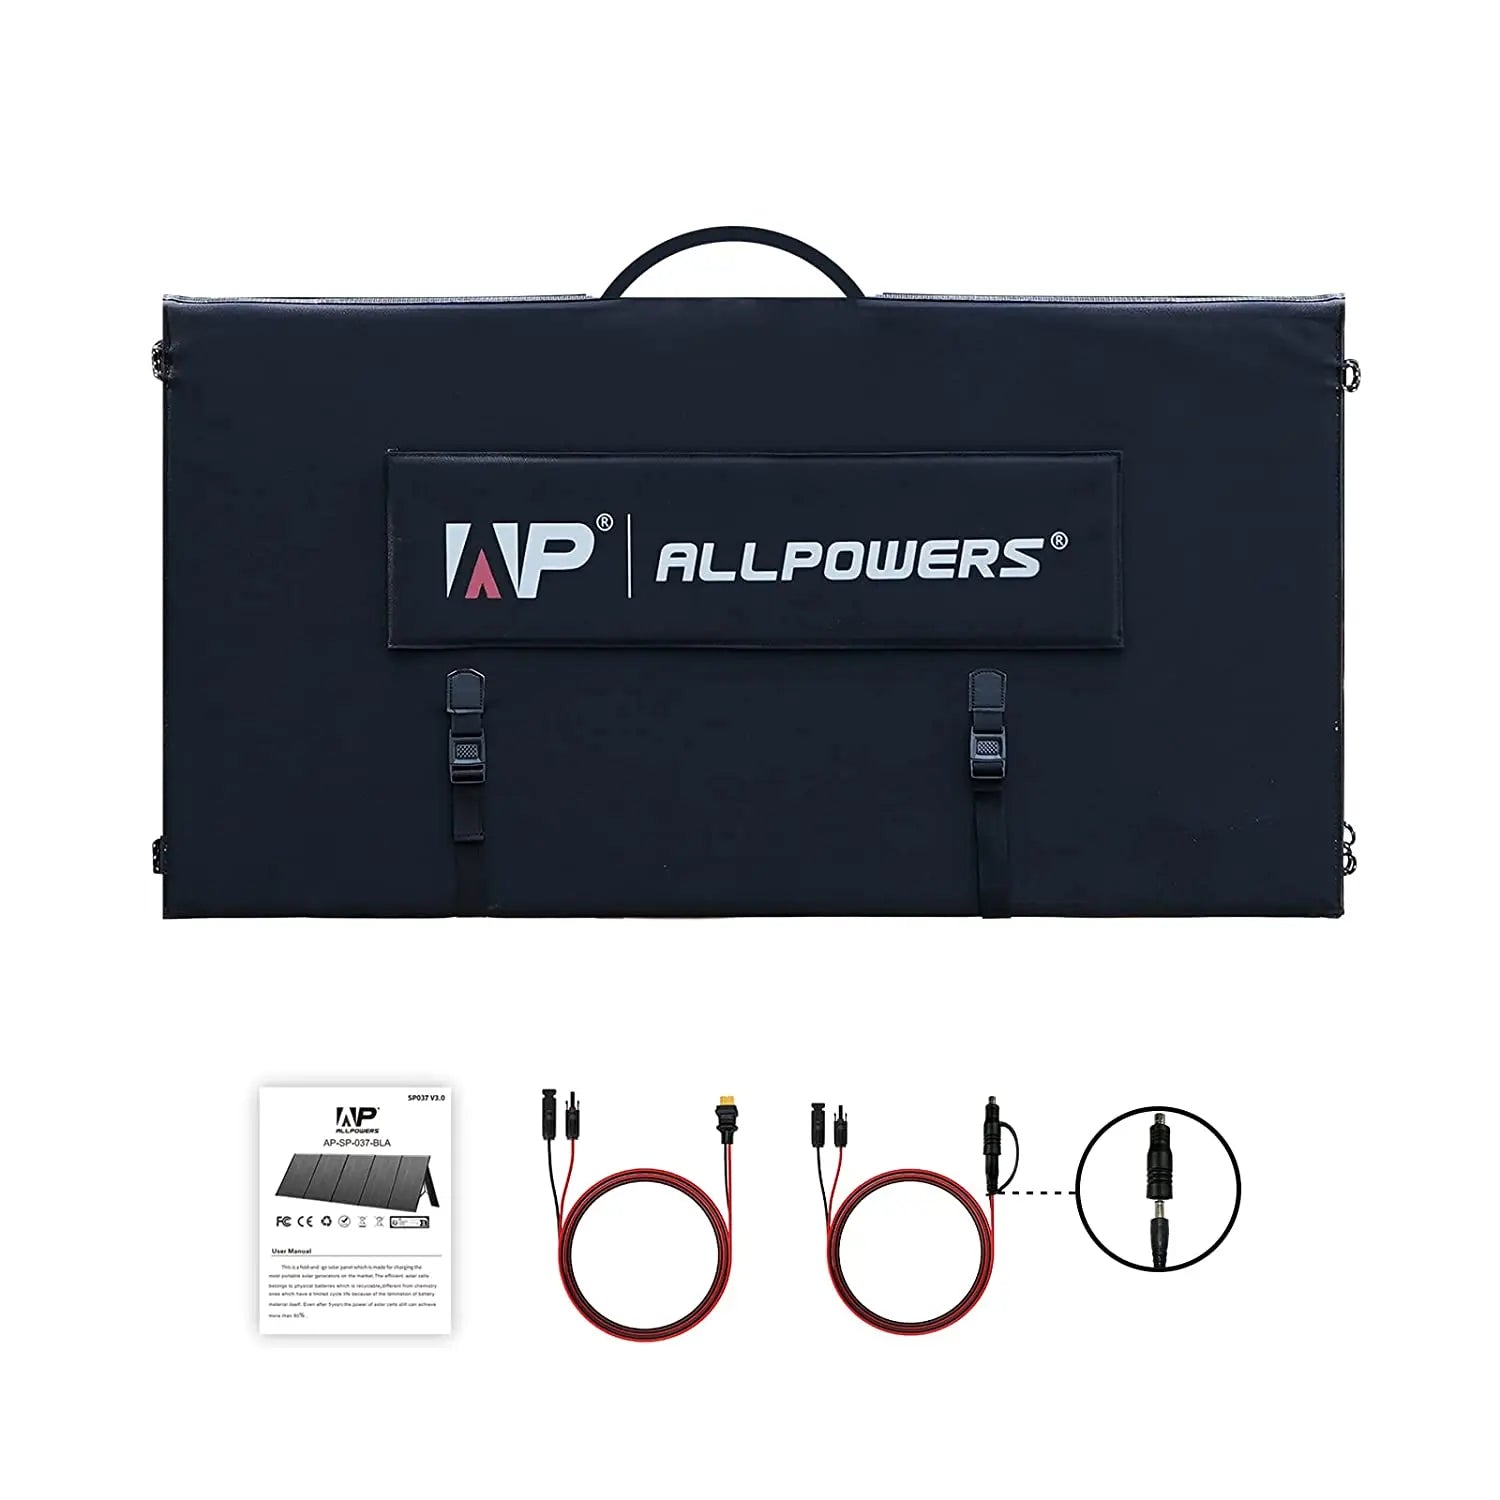 ALLPOWERS Foldable Solar Panel, Foldable solar panel with adjustable power output (400W-60W) for charging power stations or generators.